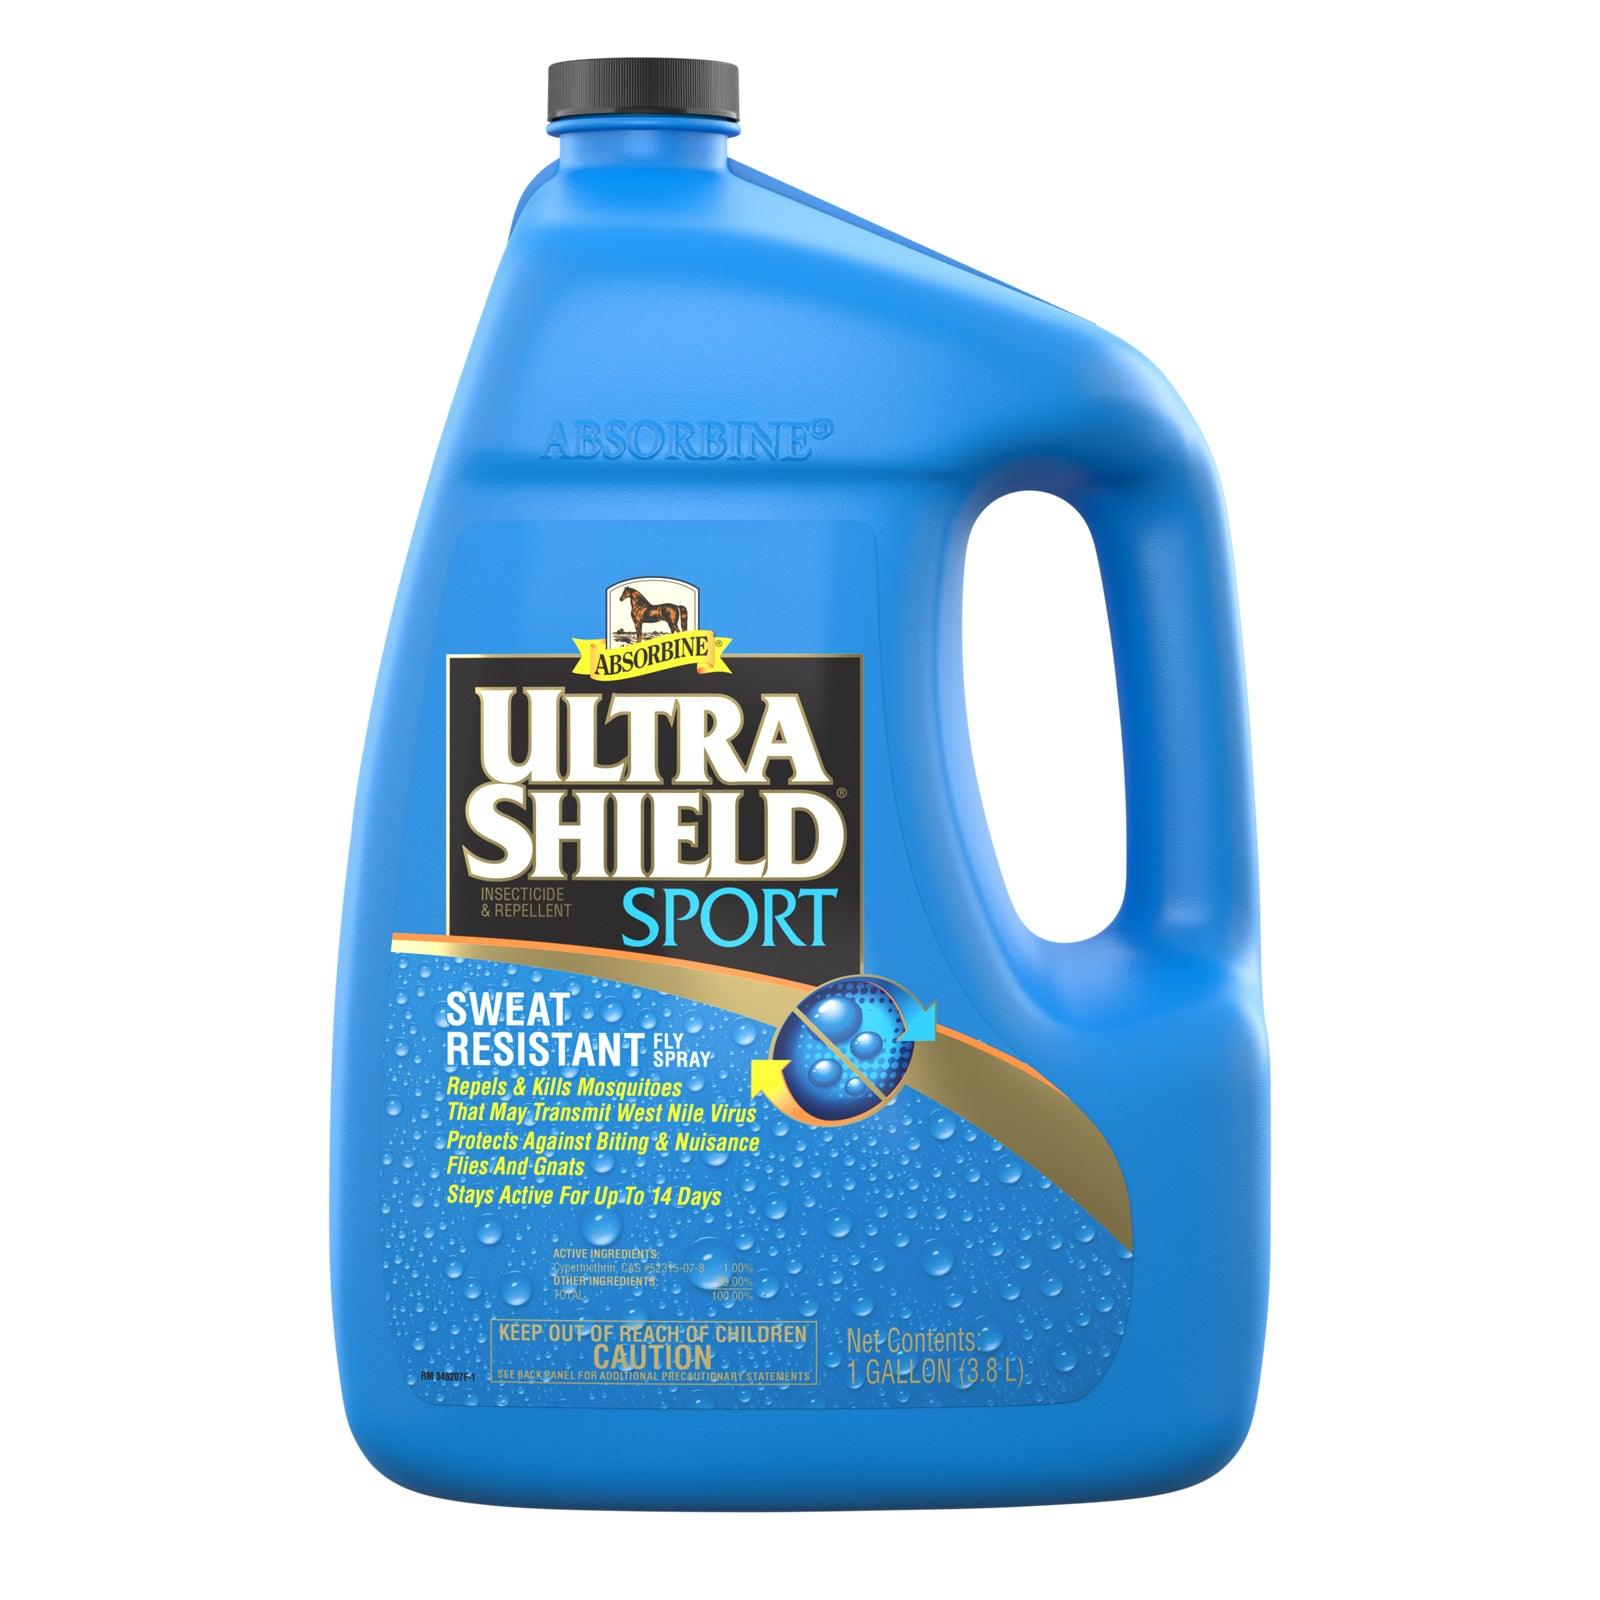 UltraShield® Sport Insecticide & Repellent Fly Control absorbine Gallon  